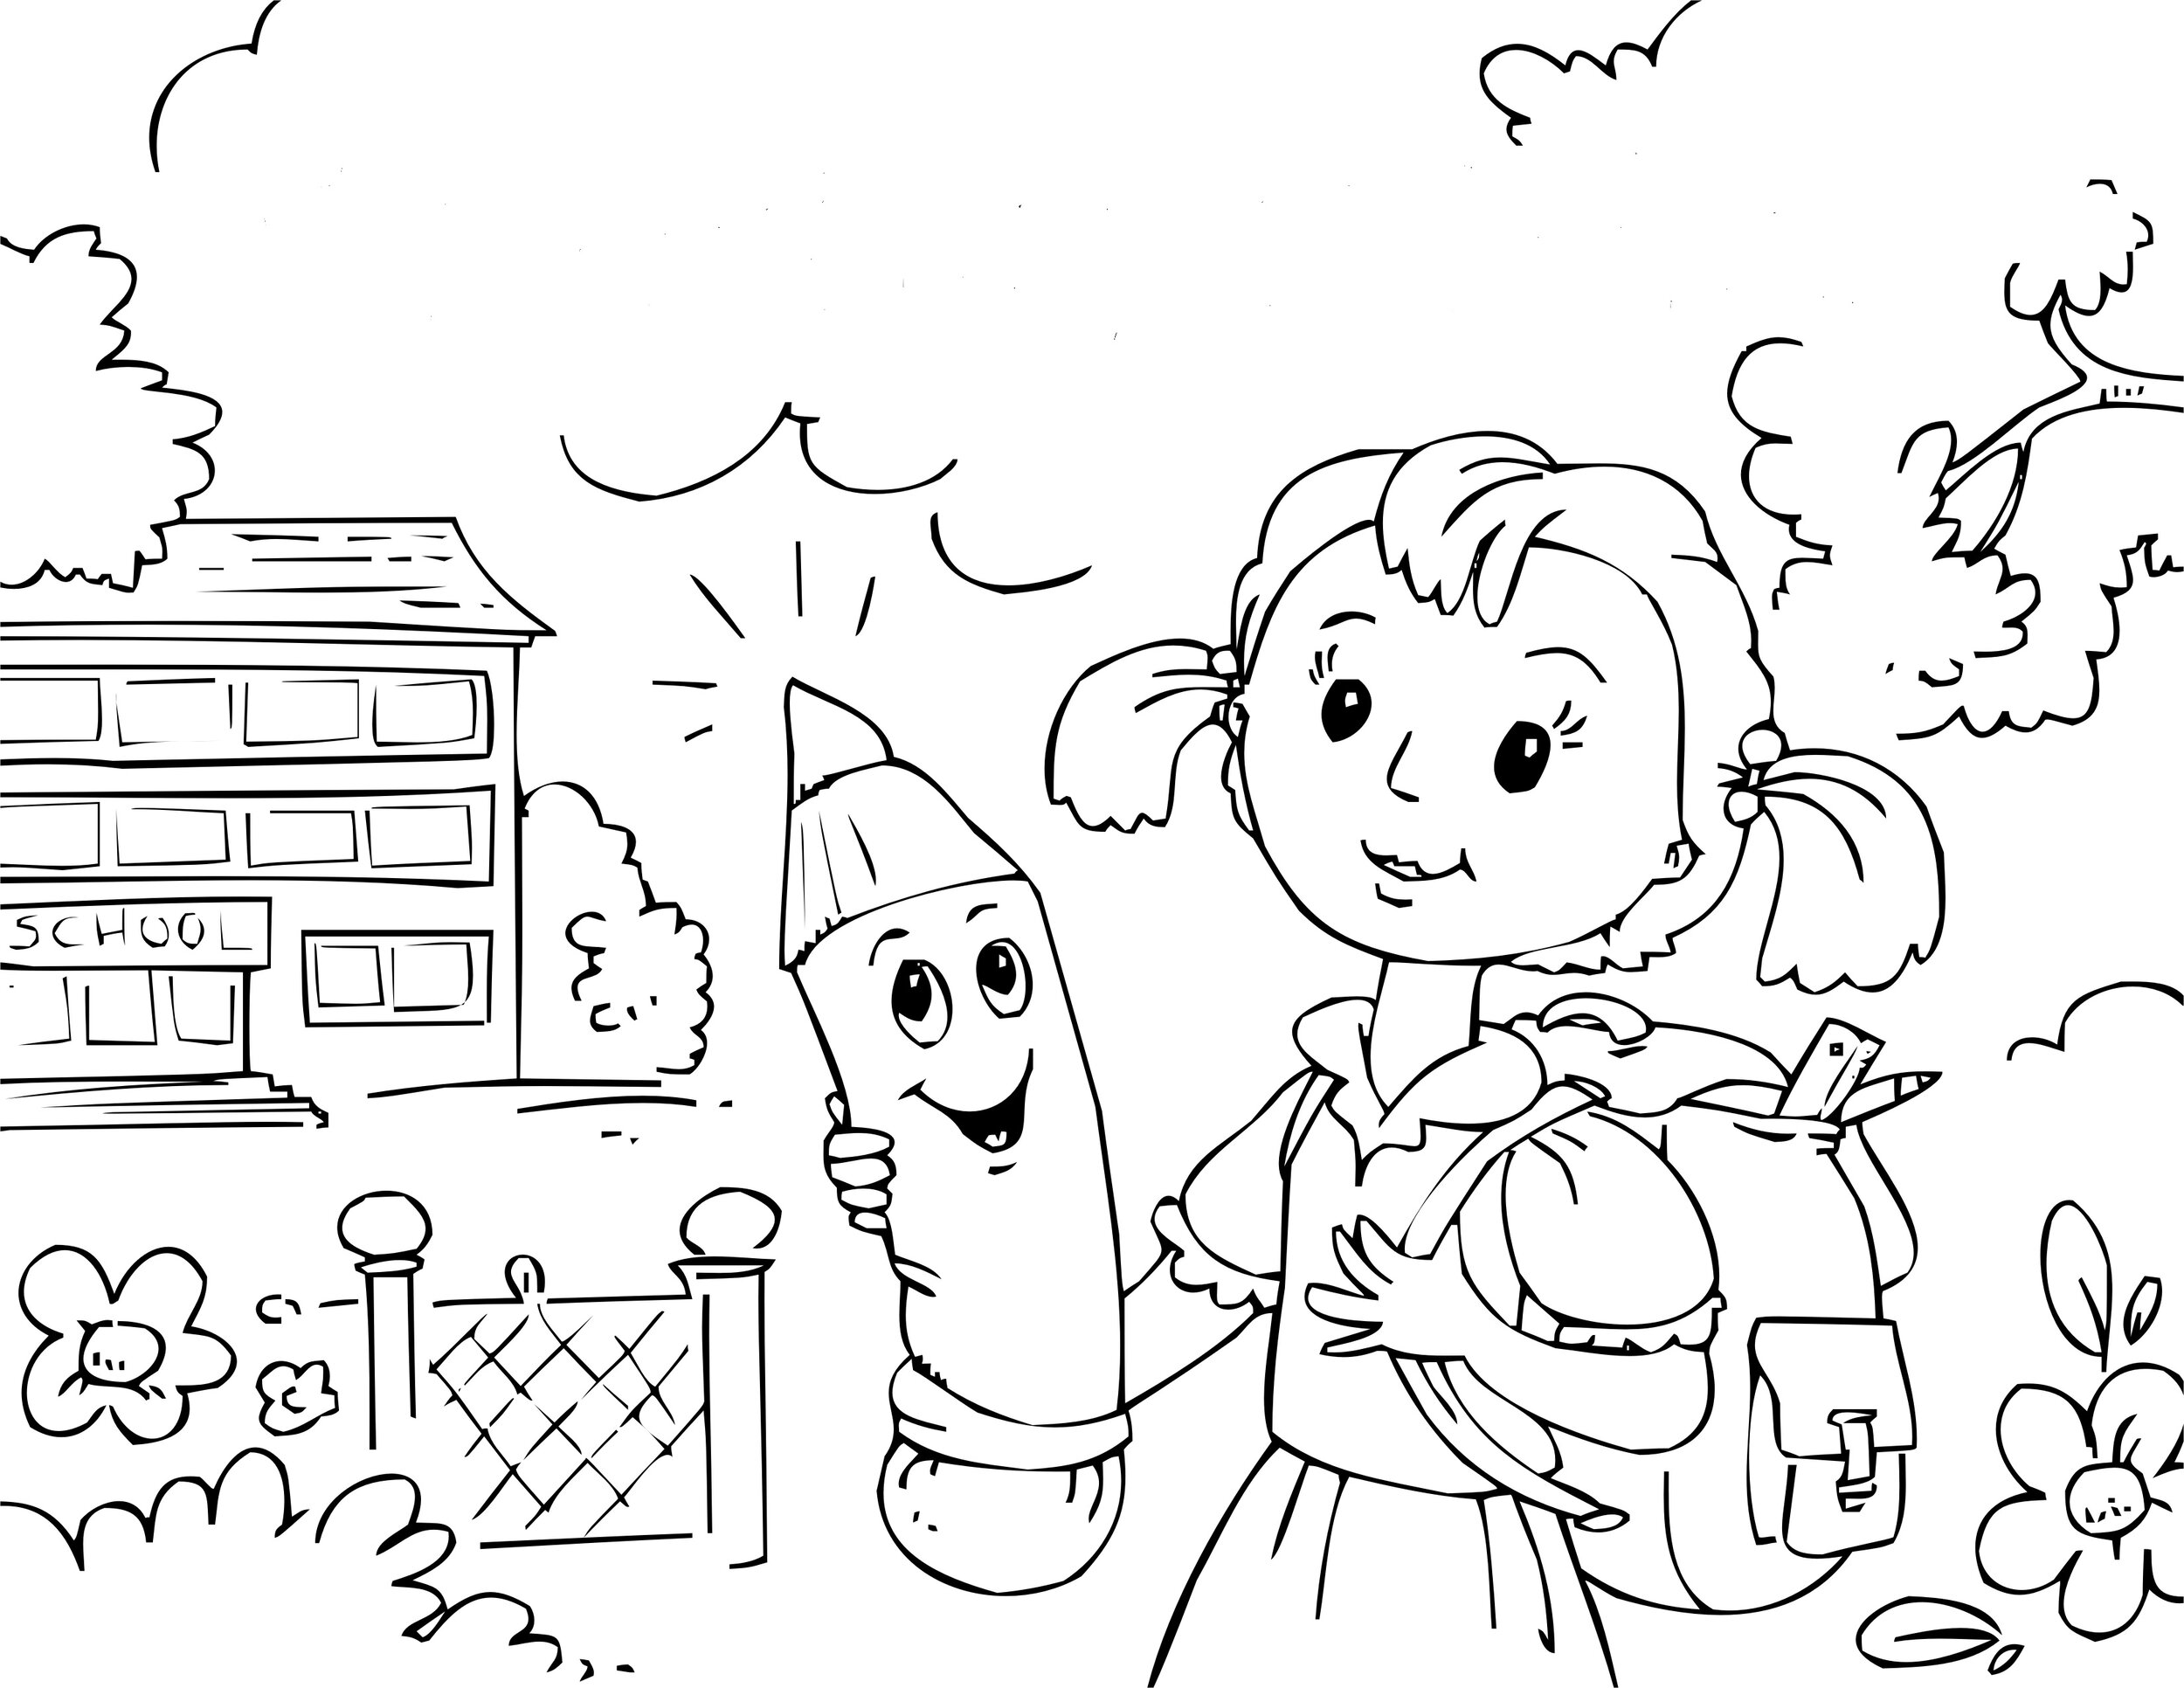 My First Day of School   Free Coloring Pages — Sew Cute Patterns